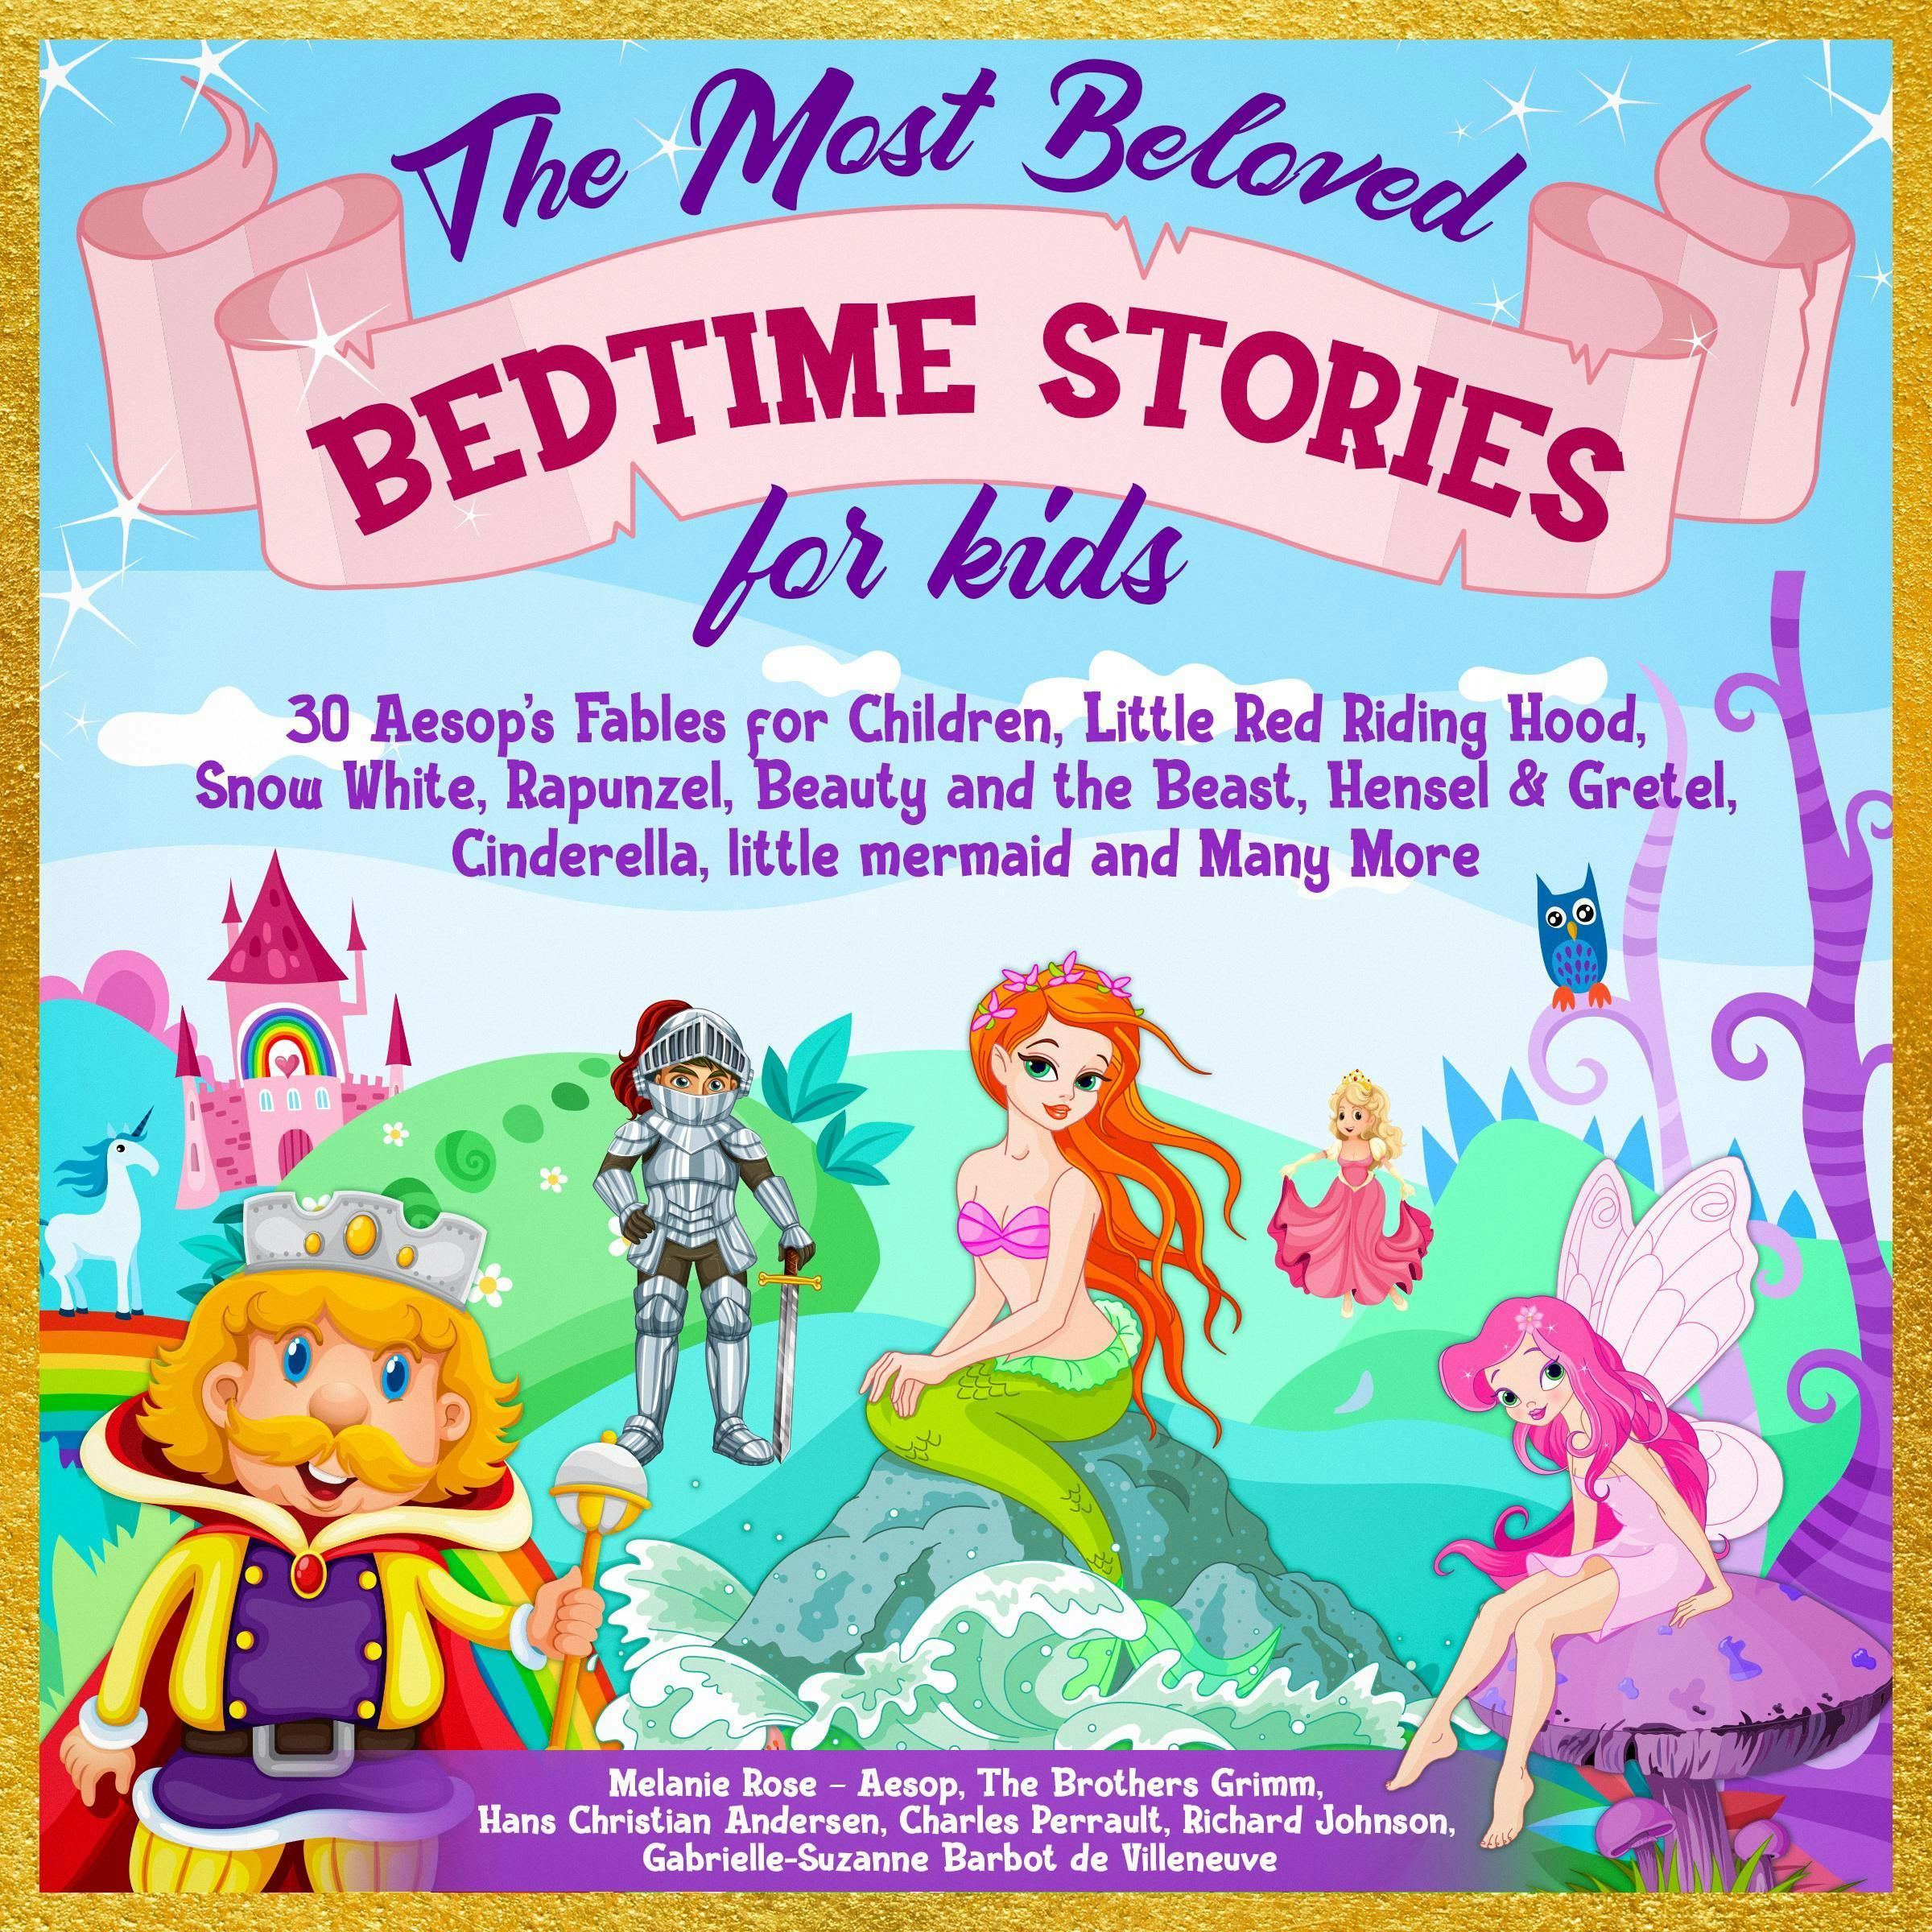 The Most Beloved Bedtime Stories for kids: 30 Aesop’s Fables for Children, Little Red Riding Hood, Snow White, Rapunzel, Beauty and the Beast, Hensel & Gretel, Cinderella, Little Mermaid and Many More - undefined